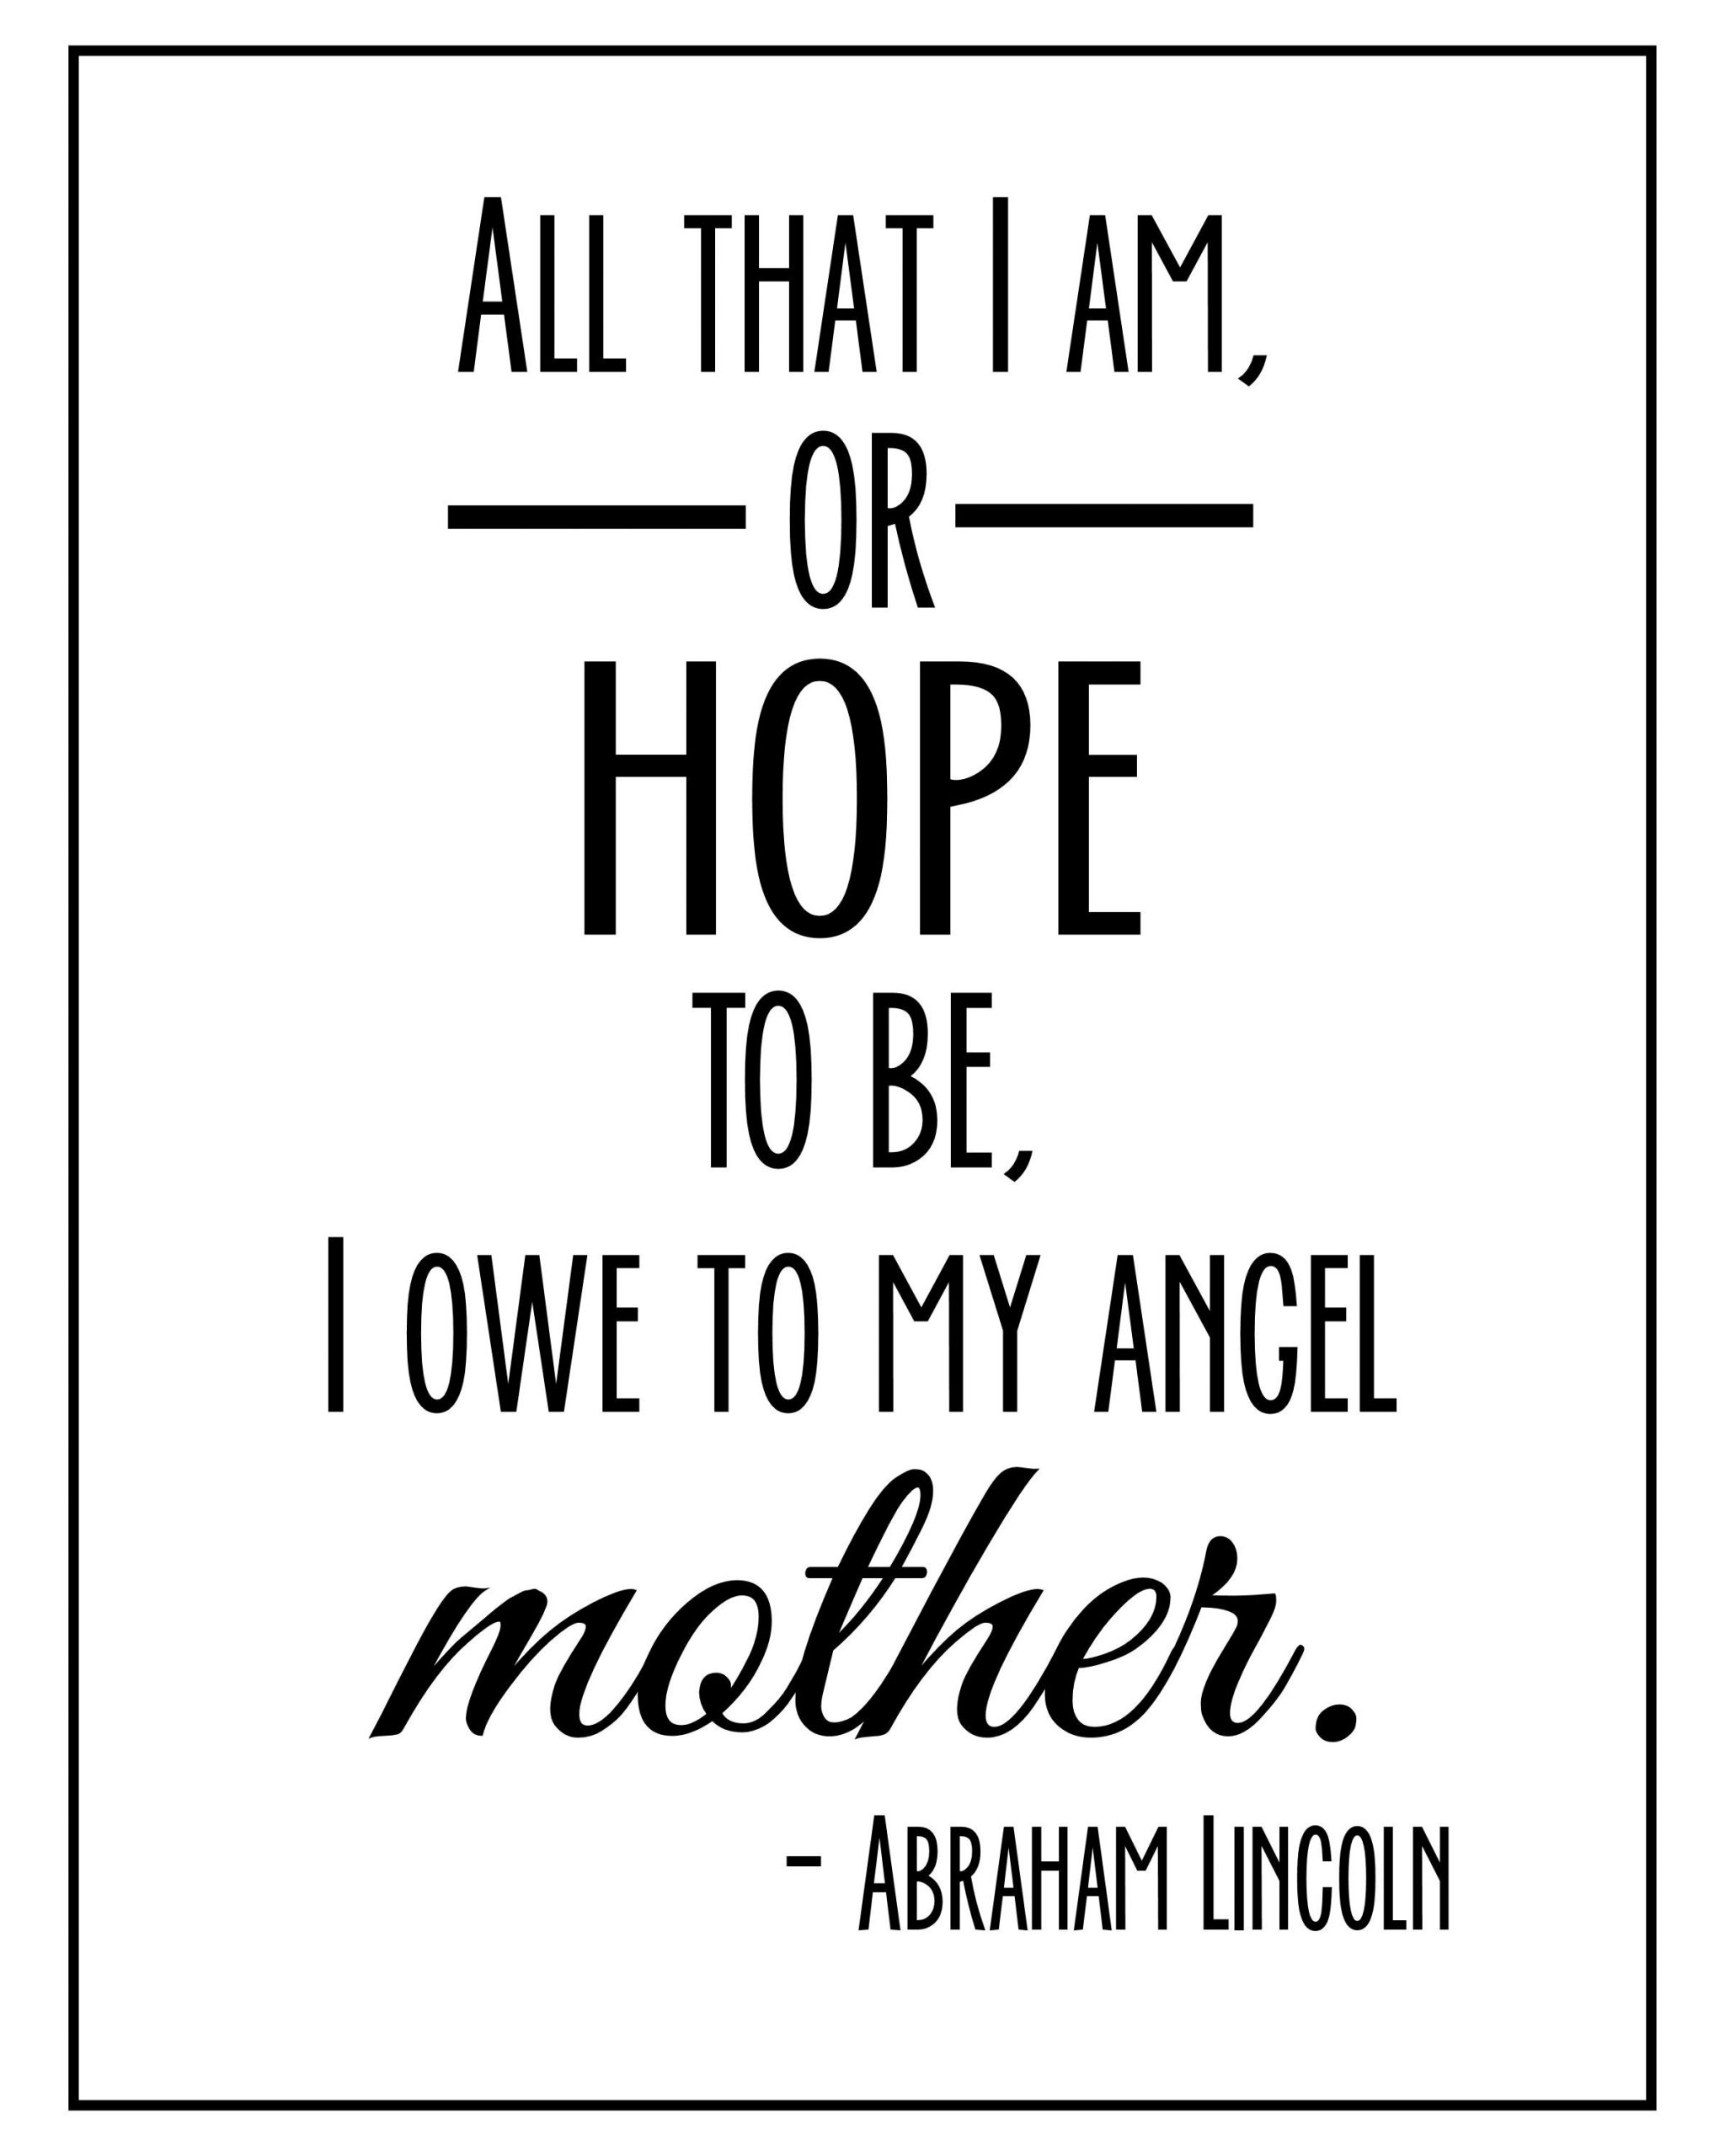 Abraham Lincoln Mother Quotes
 My angel mother Abraham Lincoln Quote